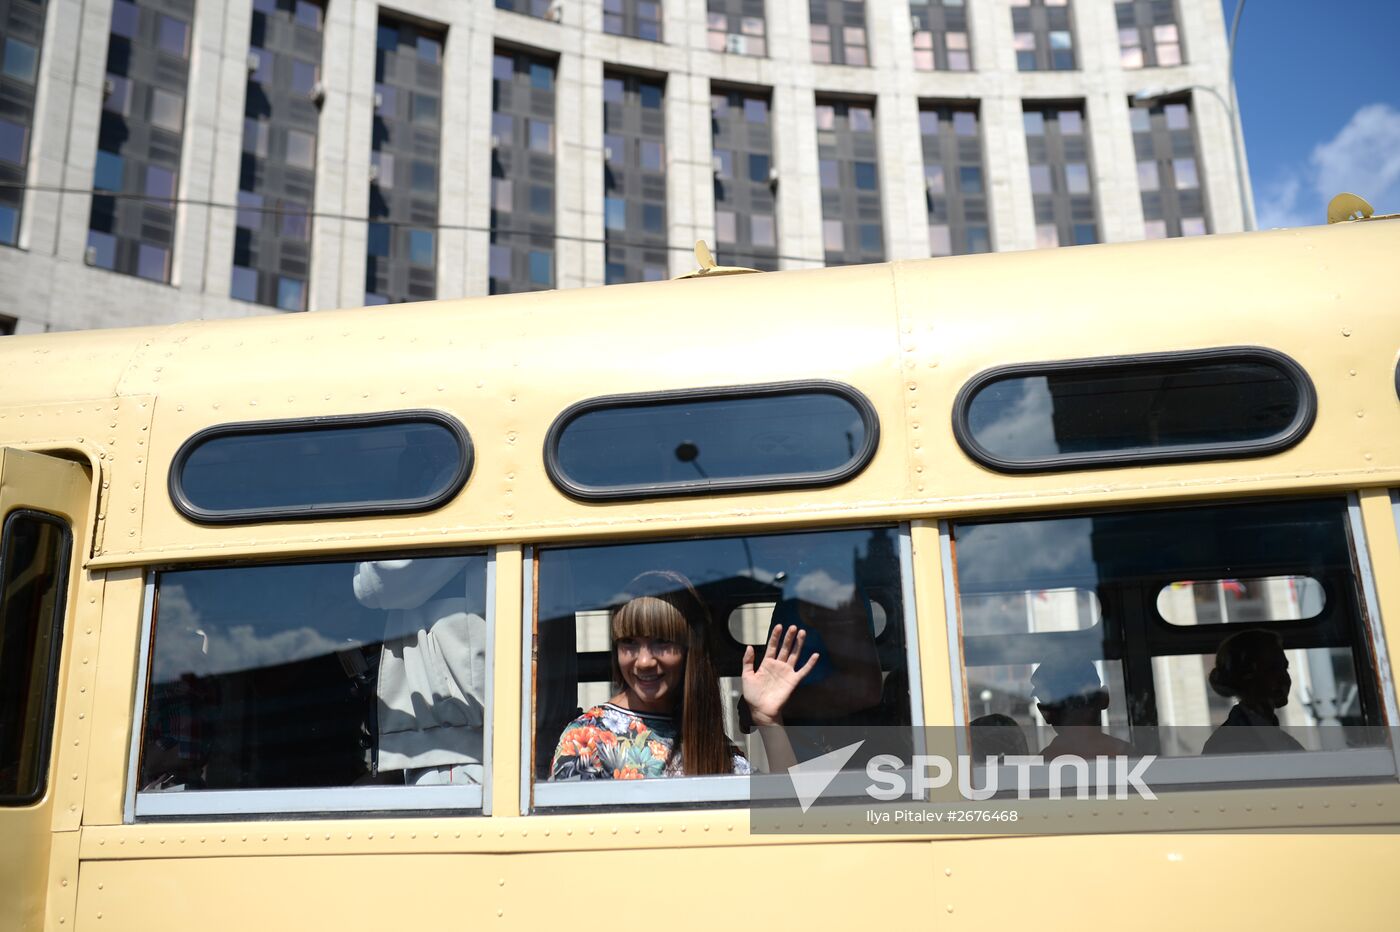 Parade of rare buses in Moscow